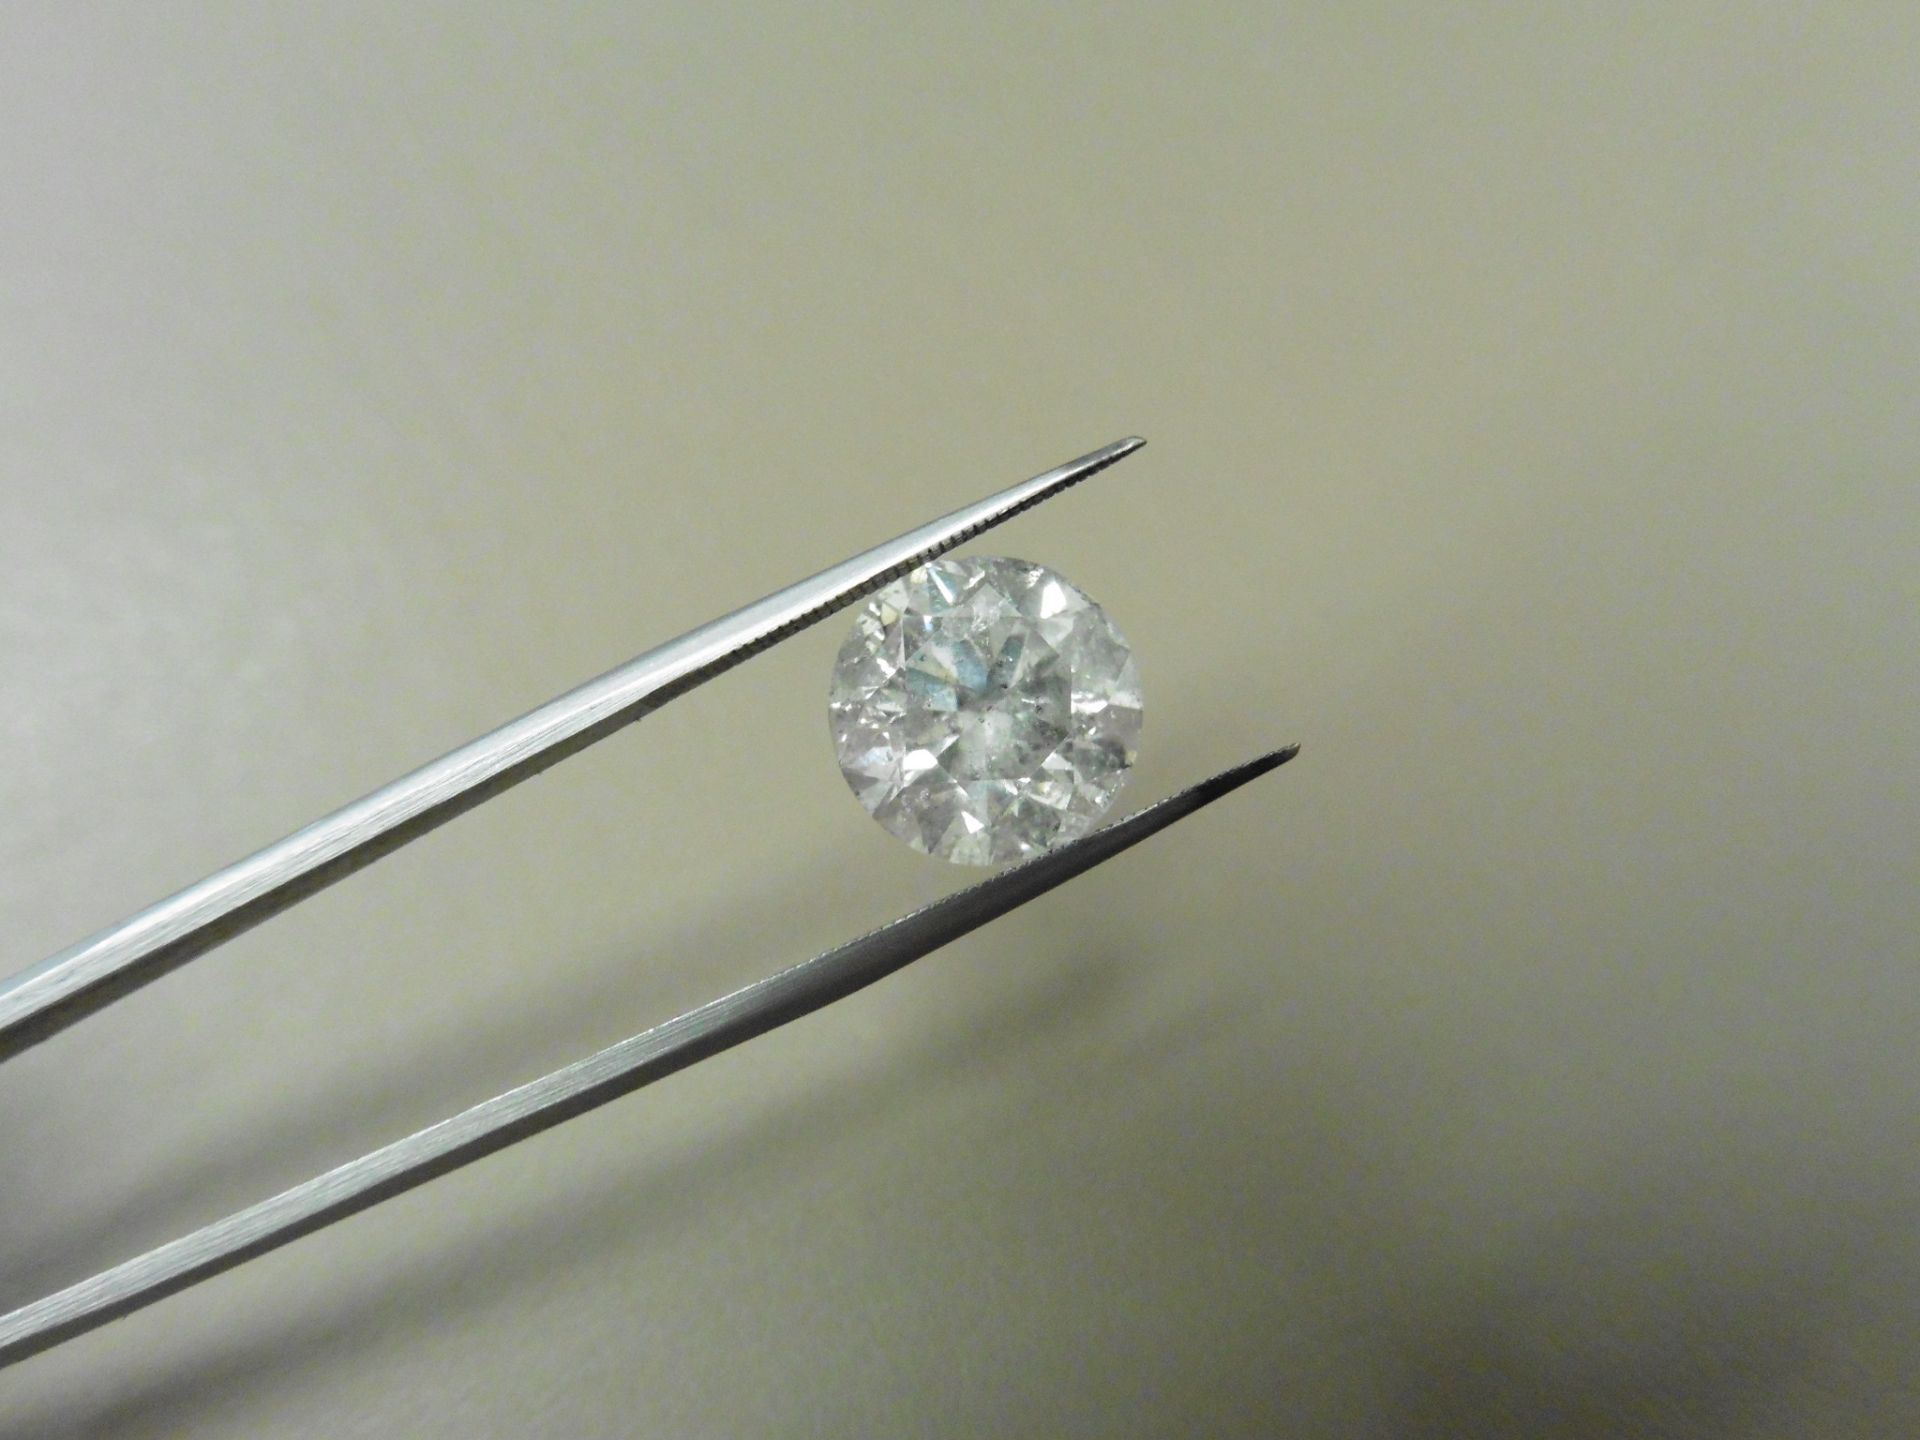 4.13ct natural loose brilliant cut diamond. G colour and I1 clarity. Natural stone. No certification